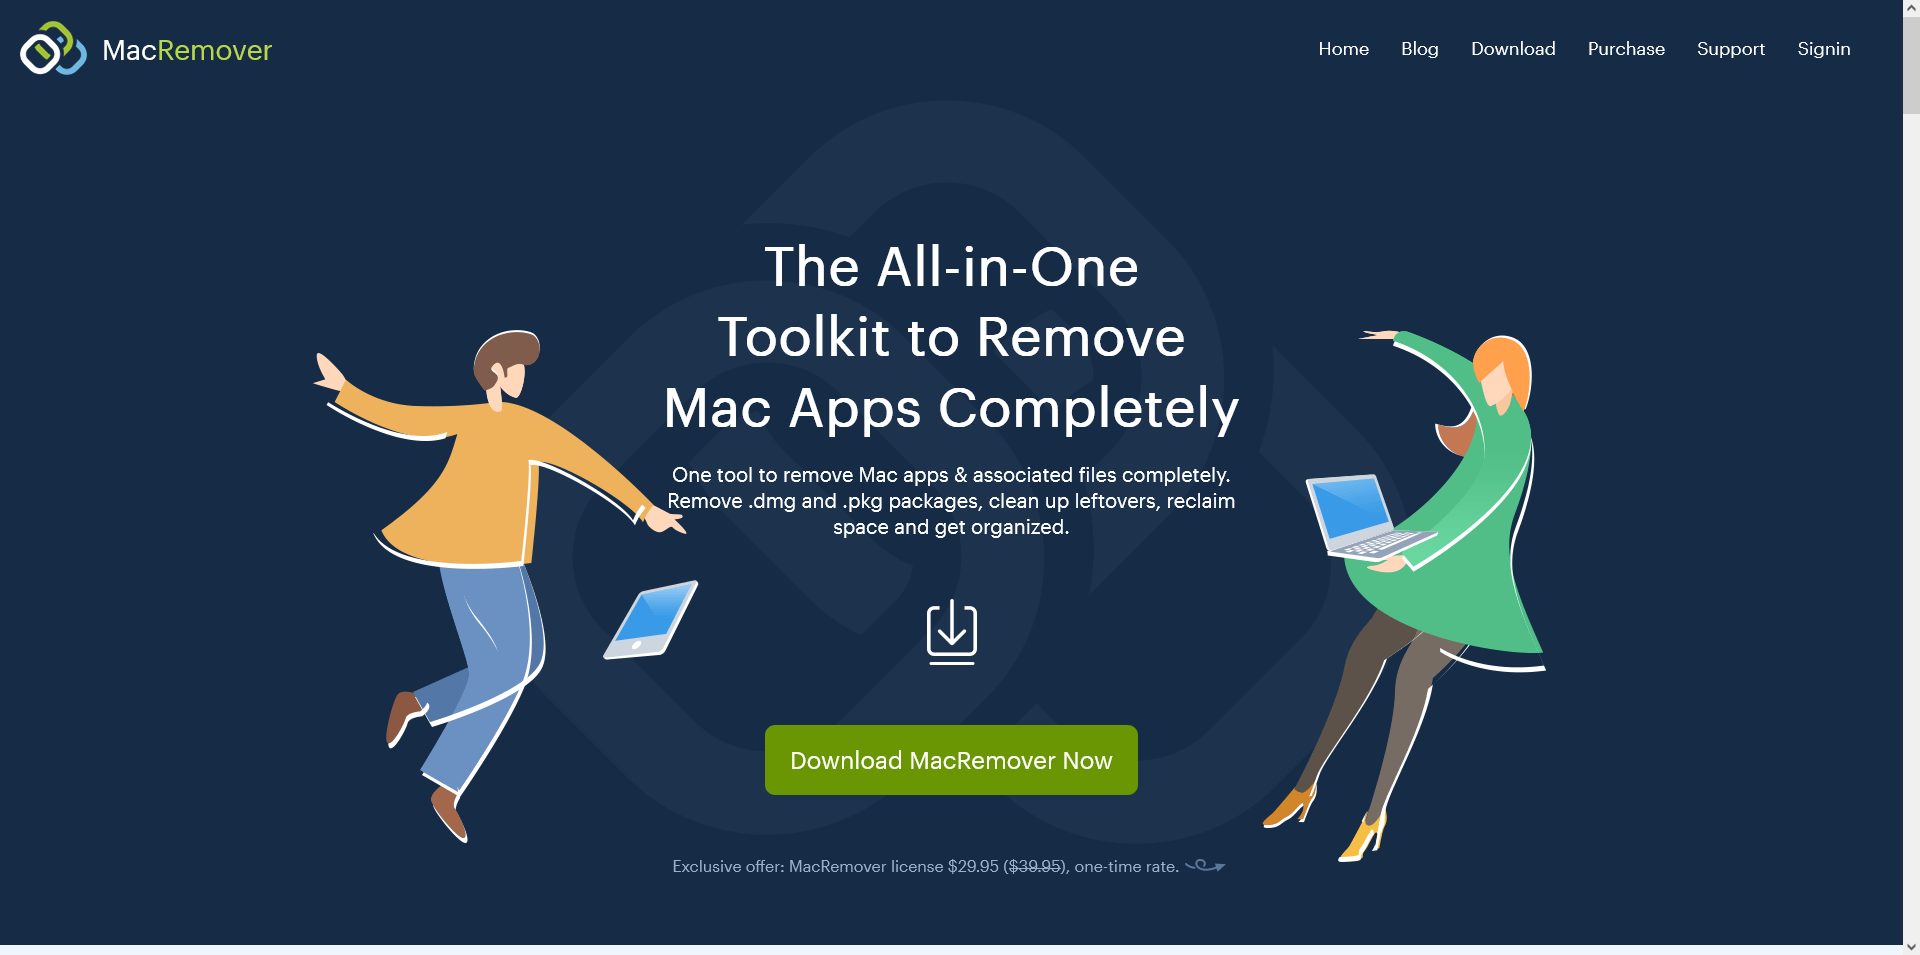 MacRemover Review